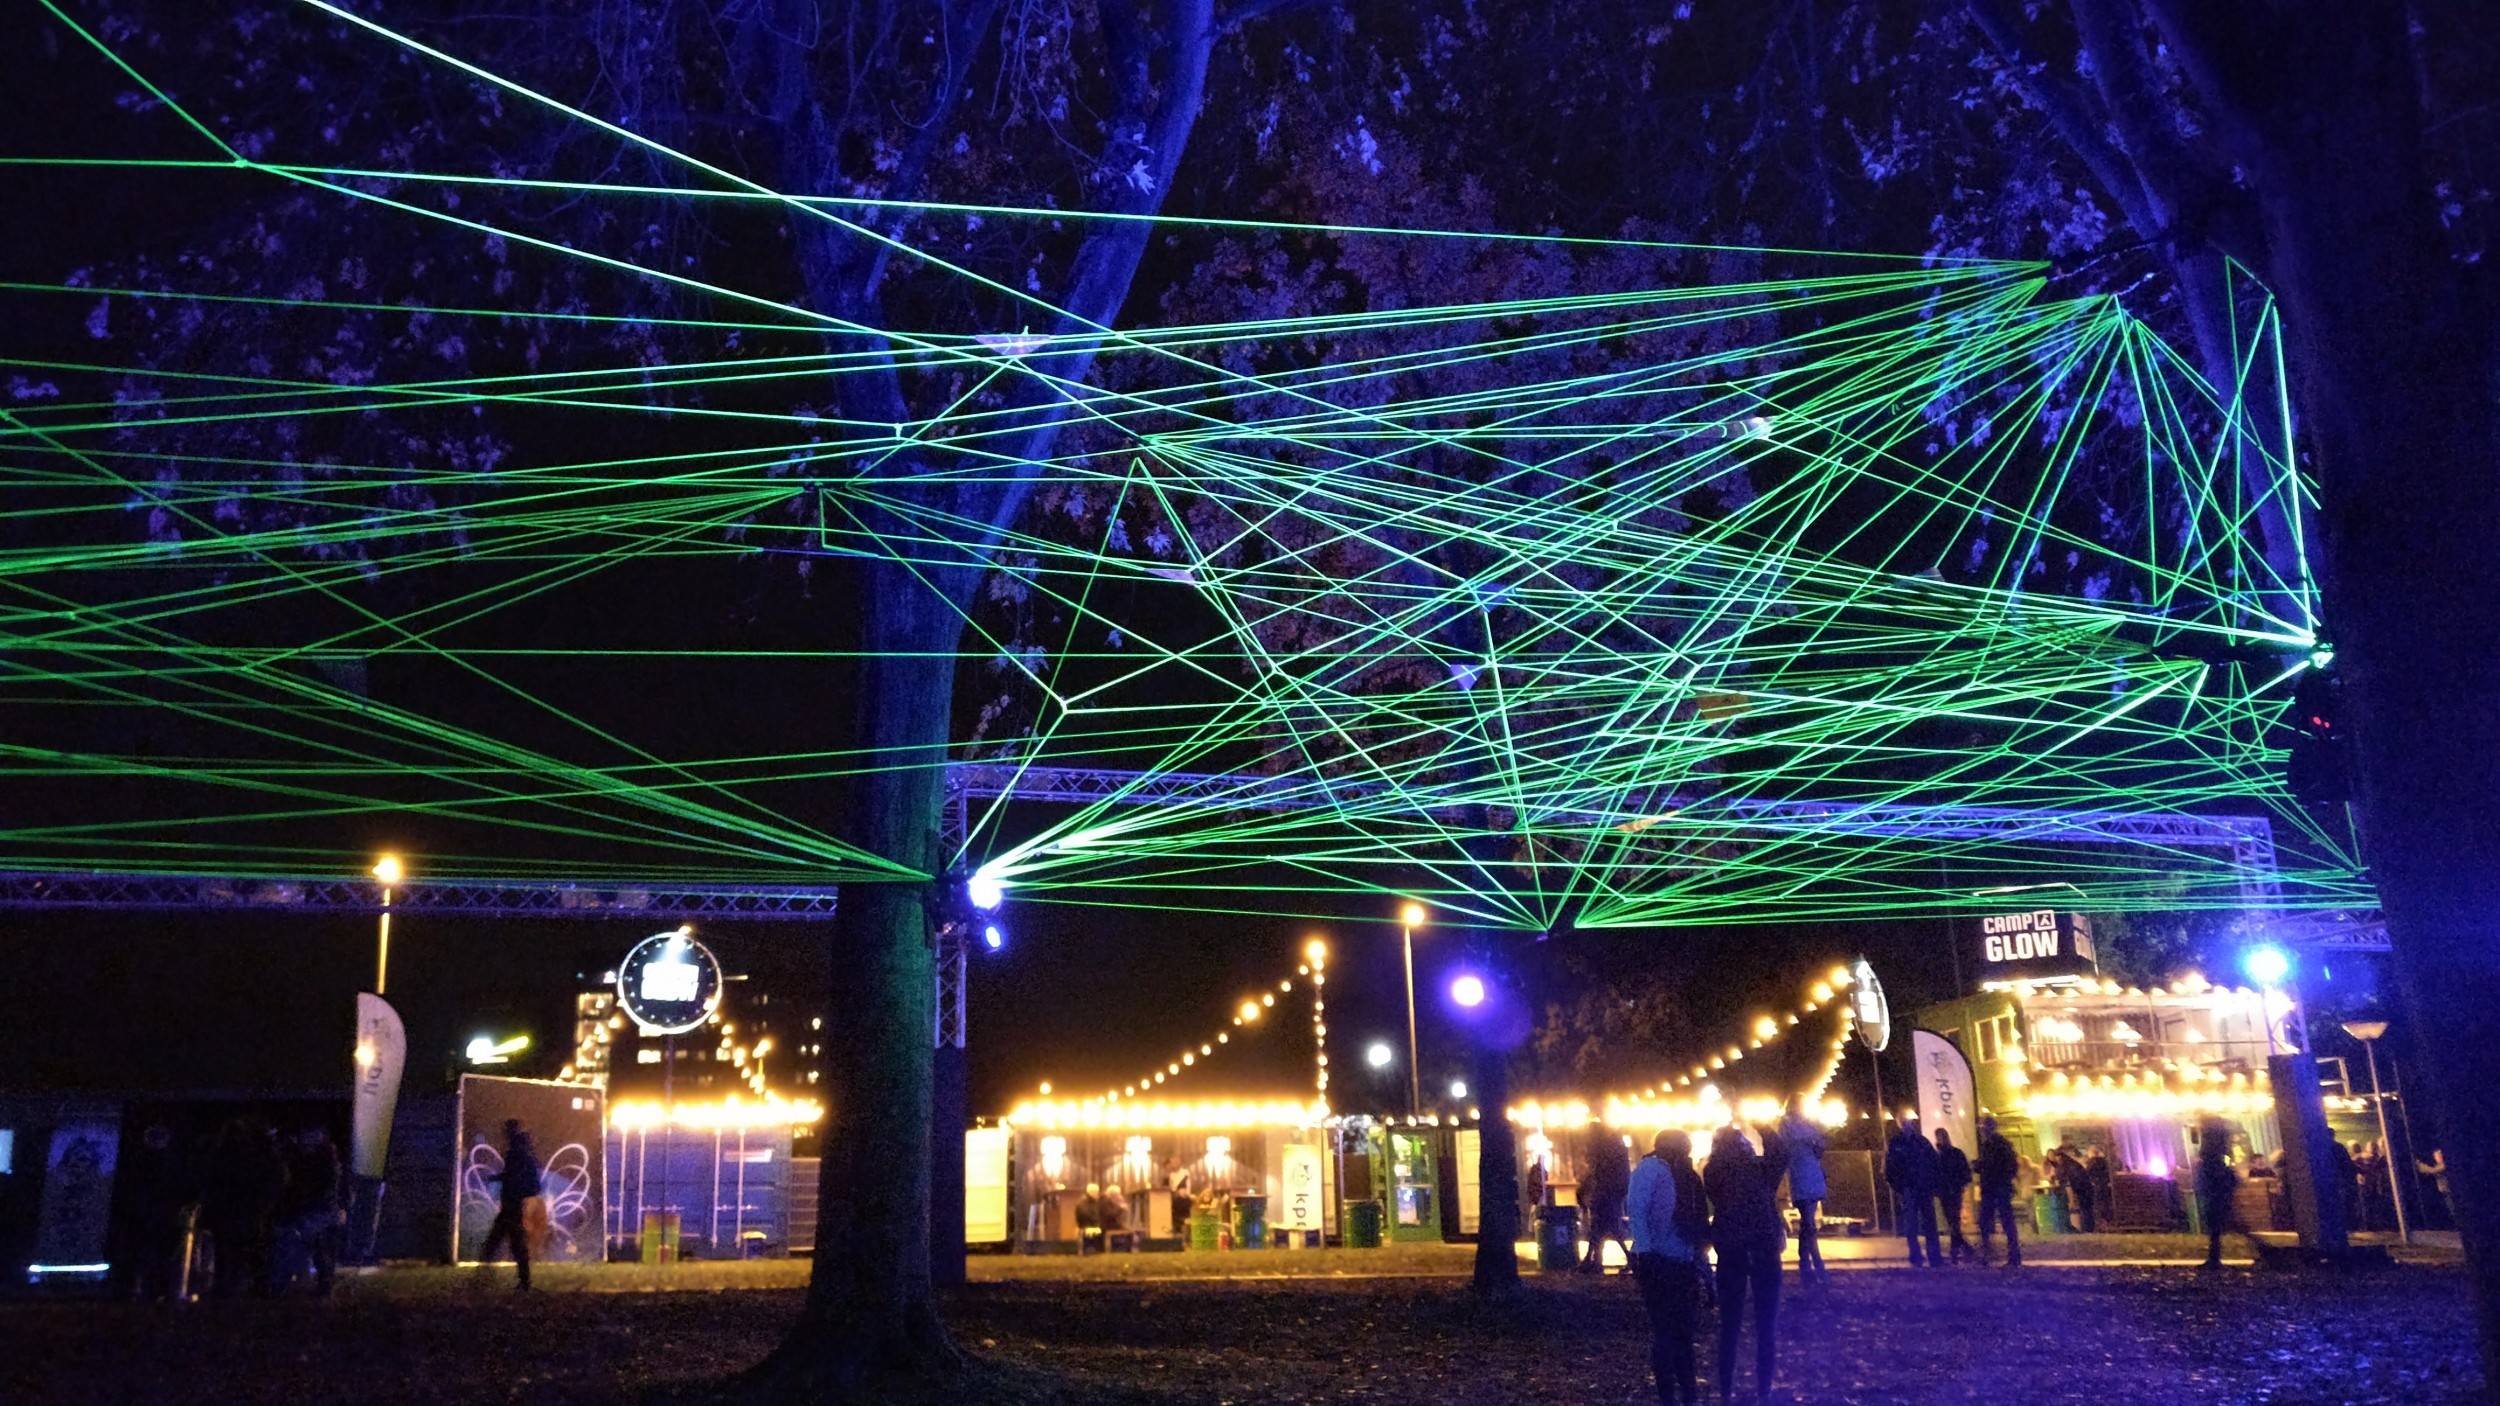 Eindhoven Glow light festival | Visions of Travel